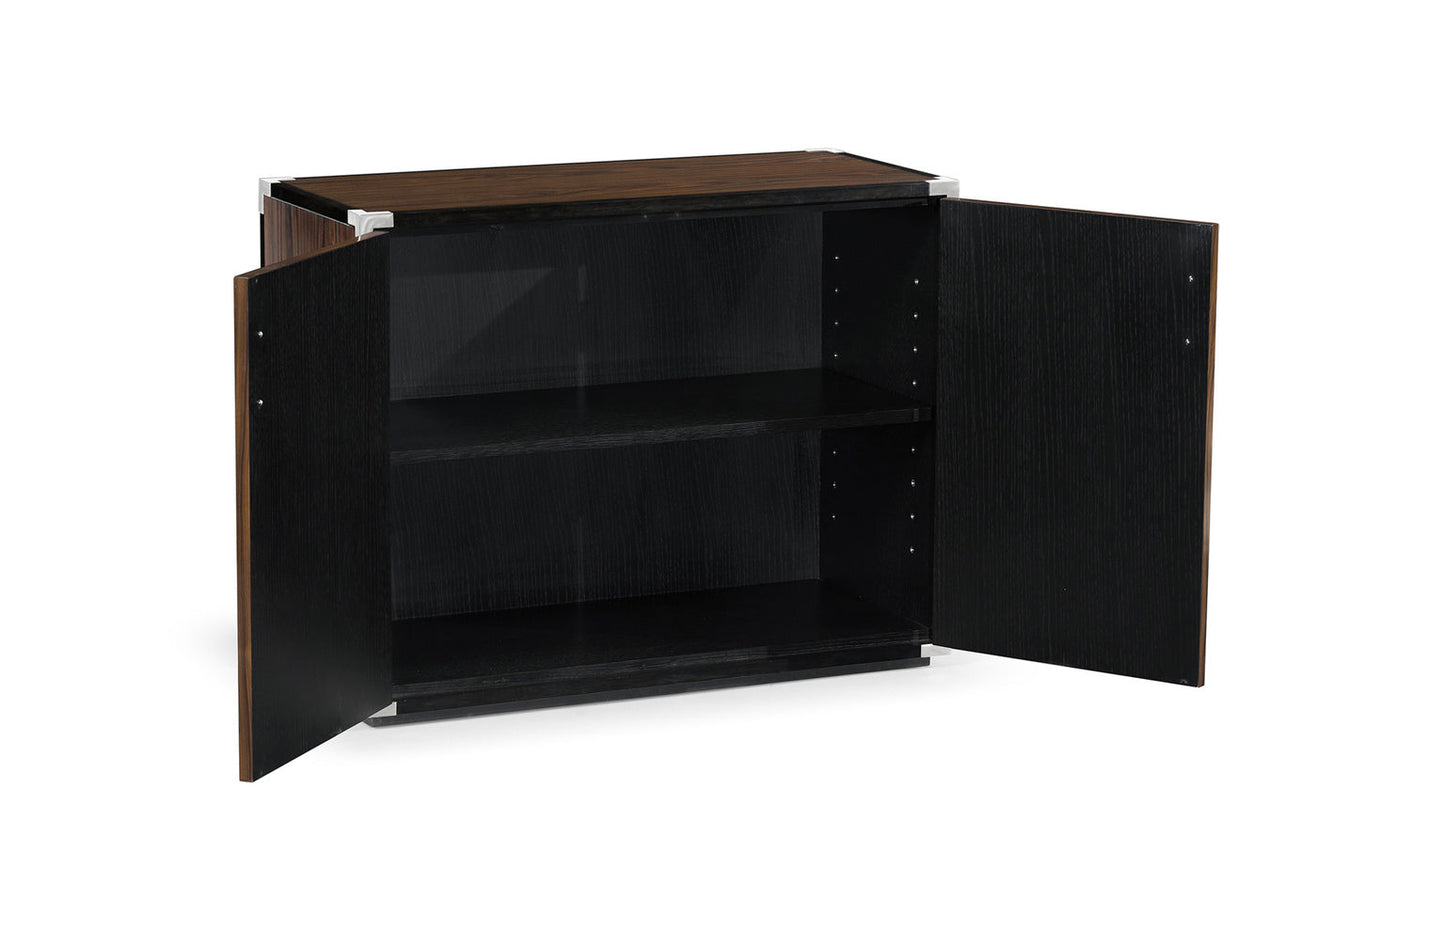 Campaign Style Dark Santos Rosewood Filing Cabinet